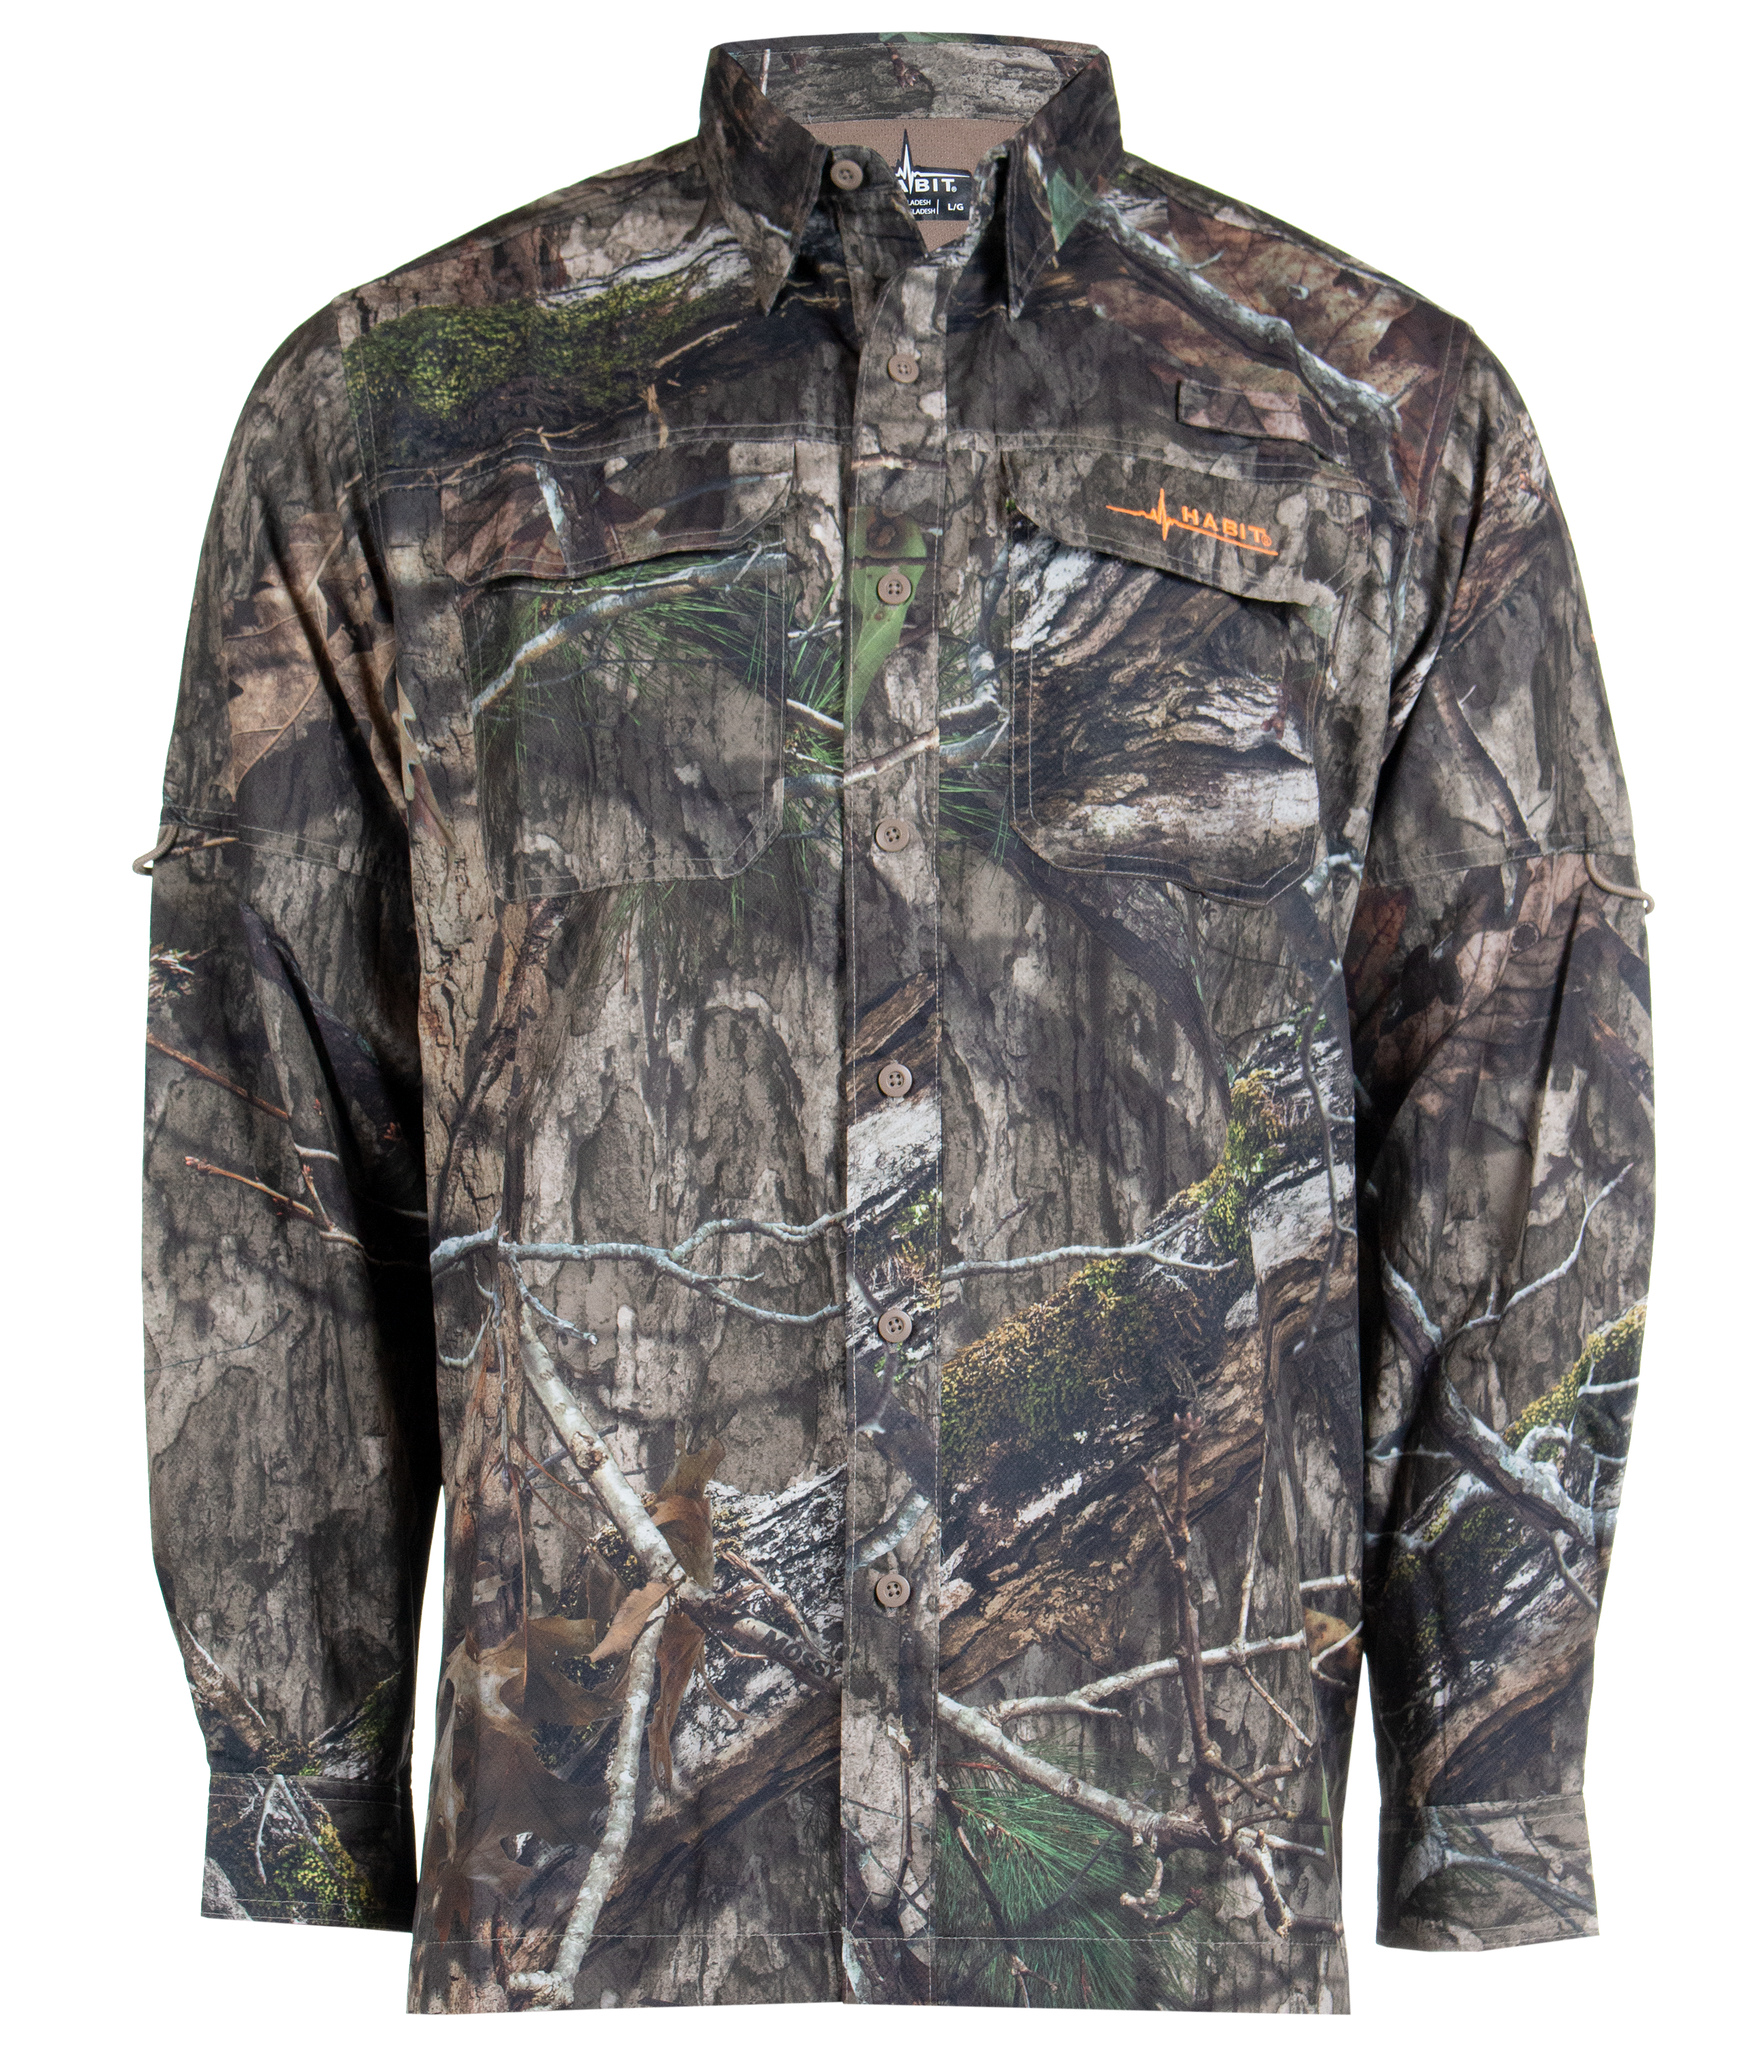 Men's Outfitter Junction Long Sleeve Camo Shirt Mossy Oak DNA on form